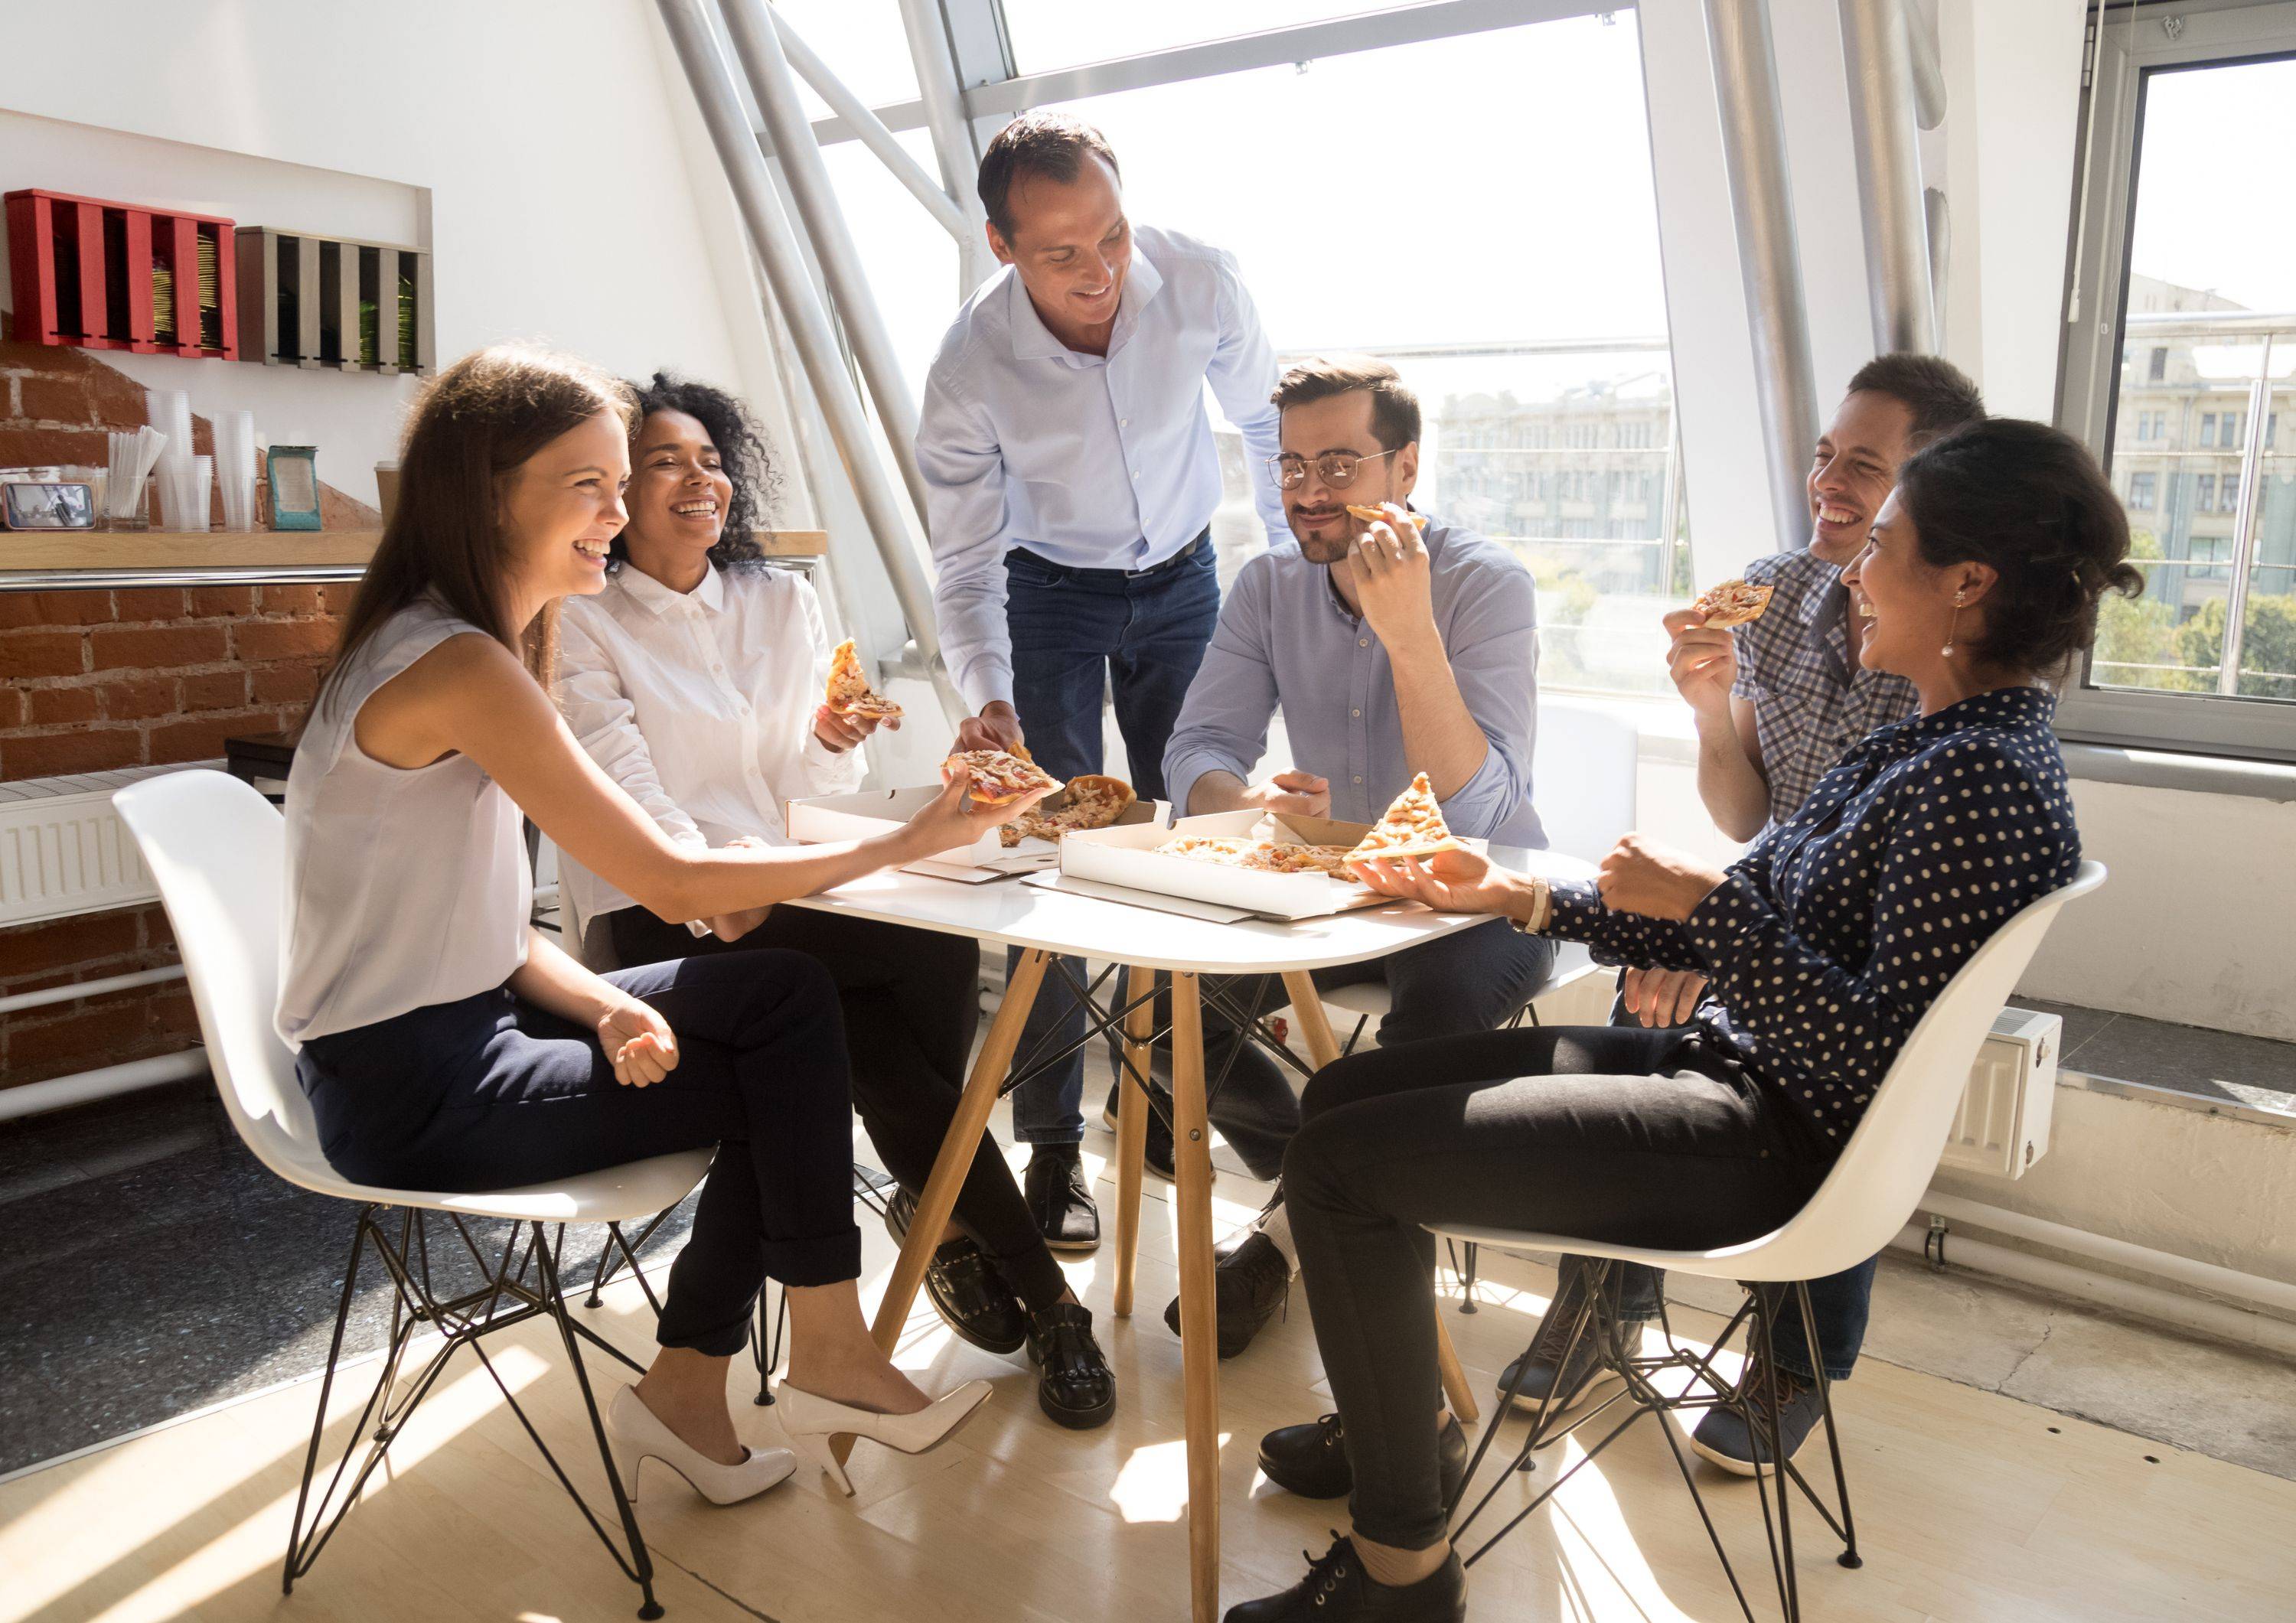 Employee satisfaction: Satisfied employees take their lunch break together